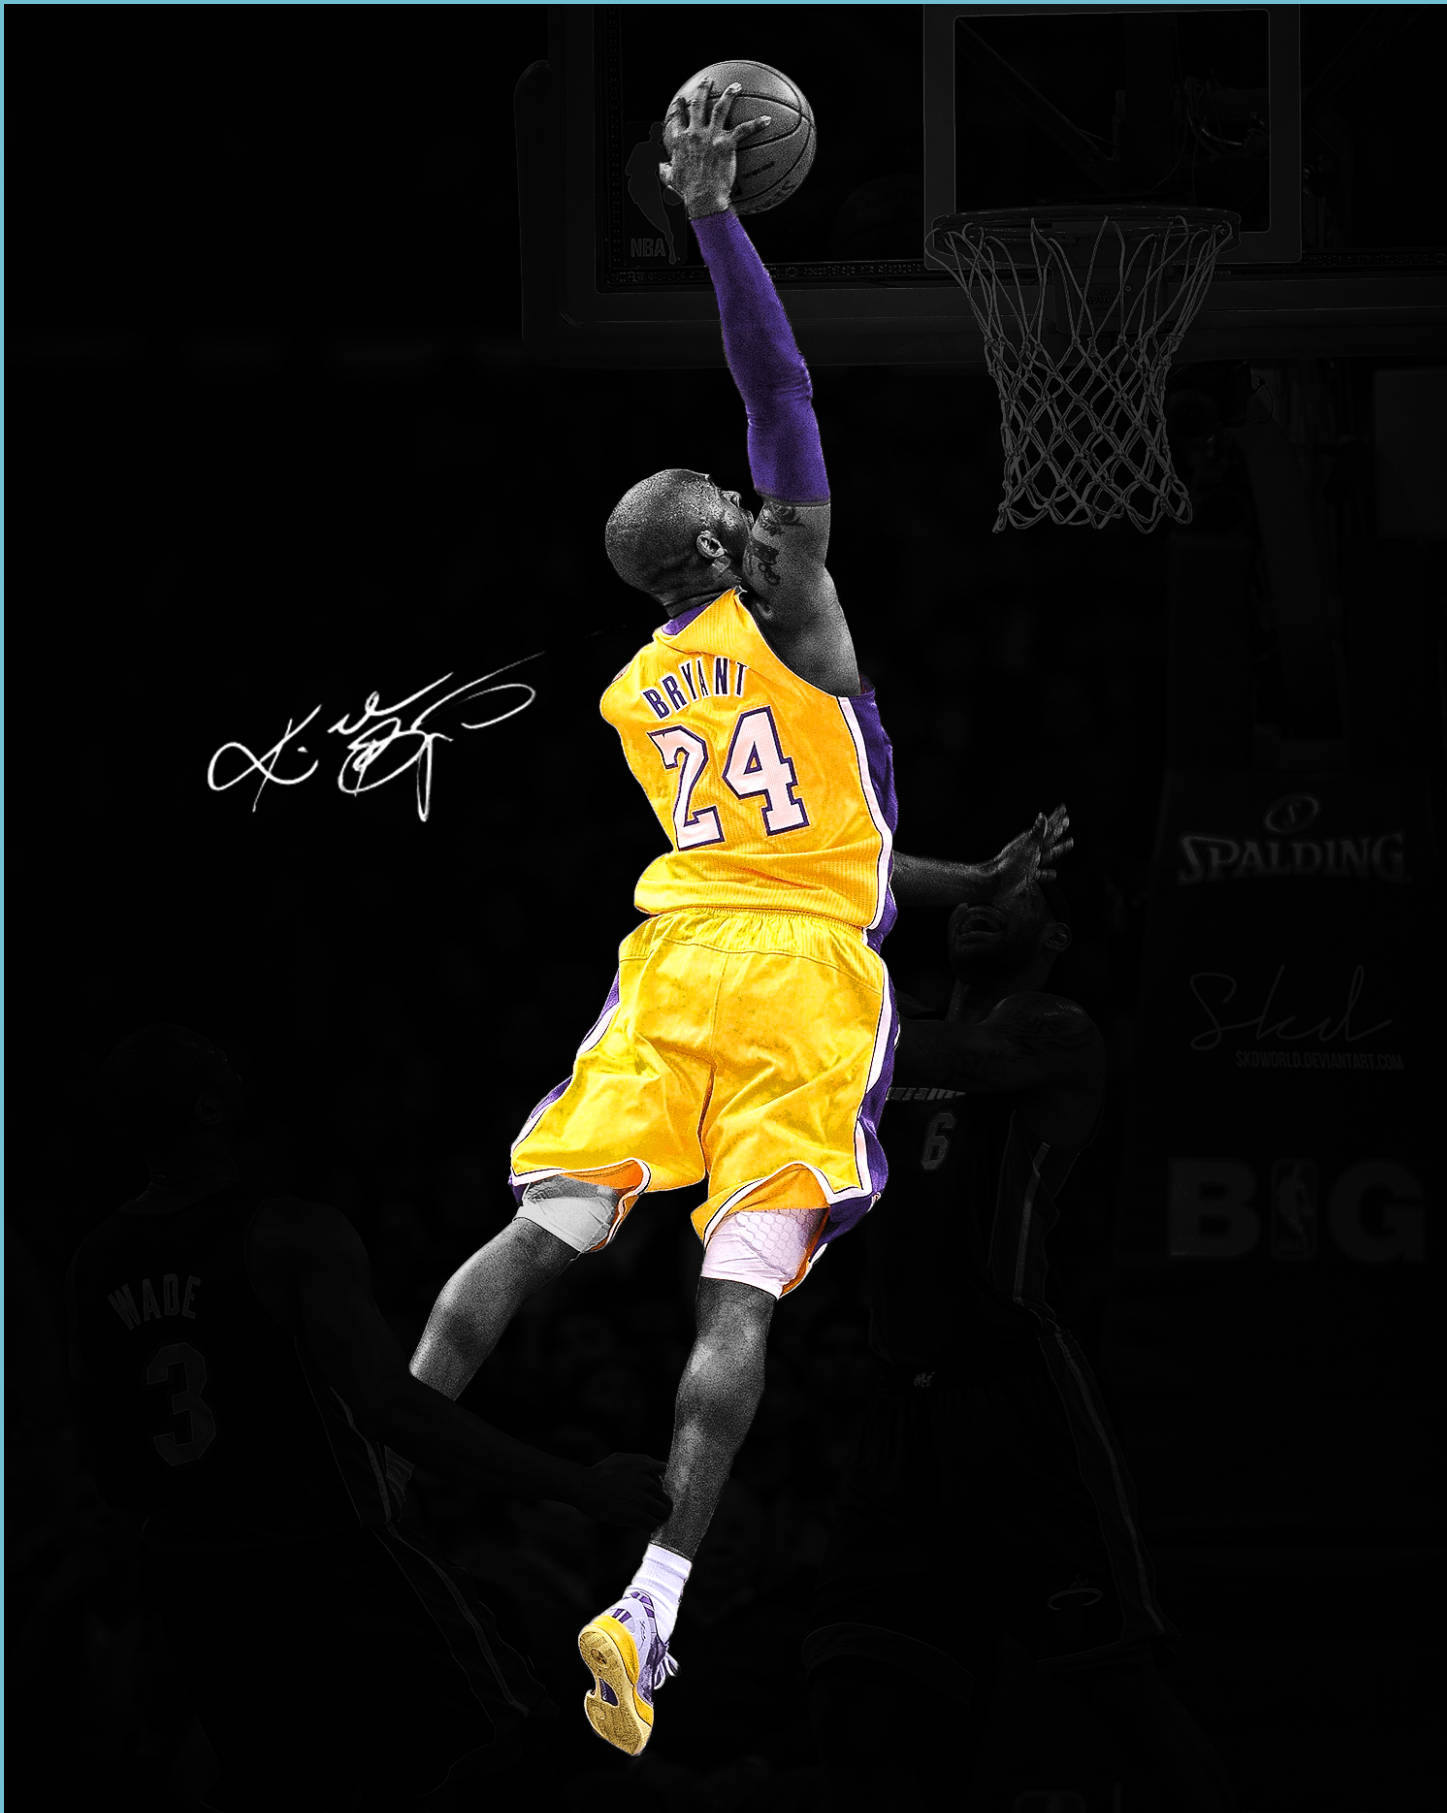 Download The Mamba Mentality Wallpaper